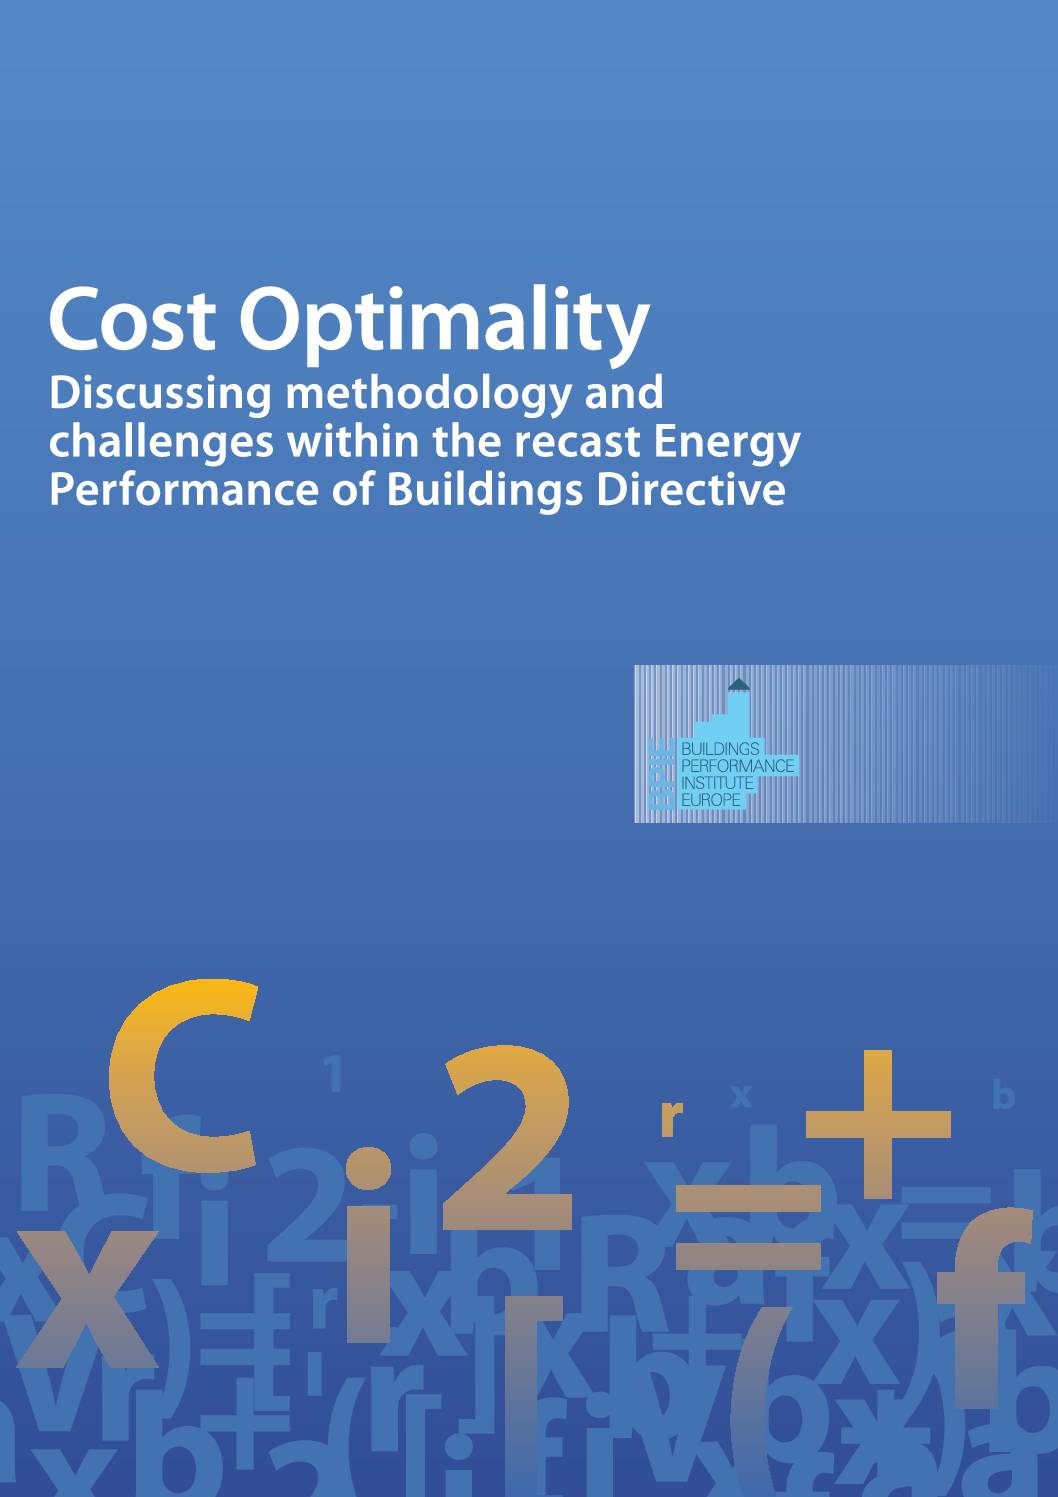 Cost Optimality: Discussing Methodology and Challenges within the Recast Performance of Buildings Directive